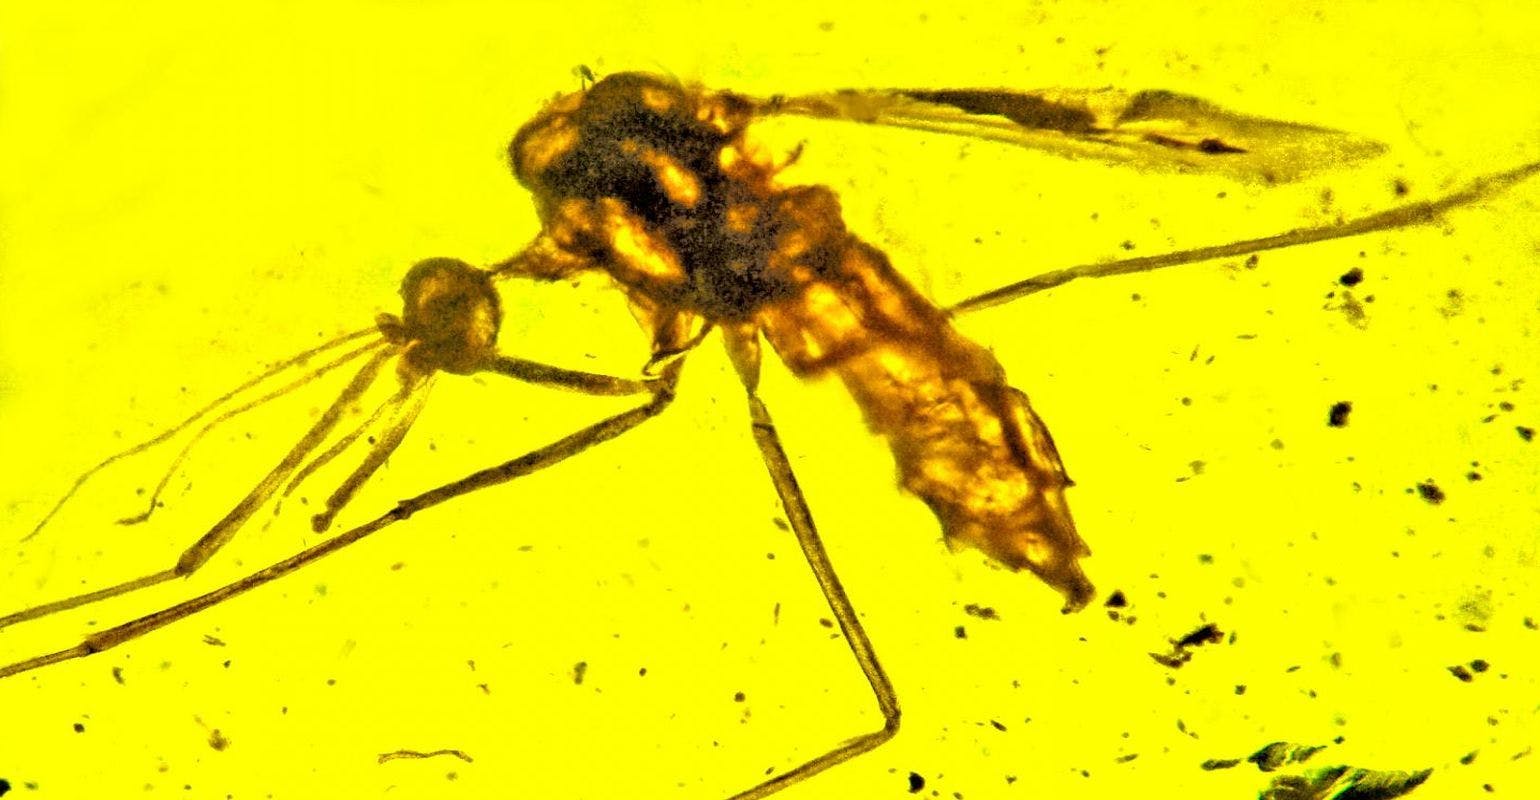 Malaria-Carrying Mosquitoes Were Present in Ancient Times